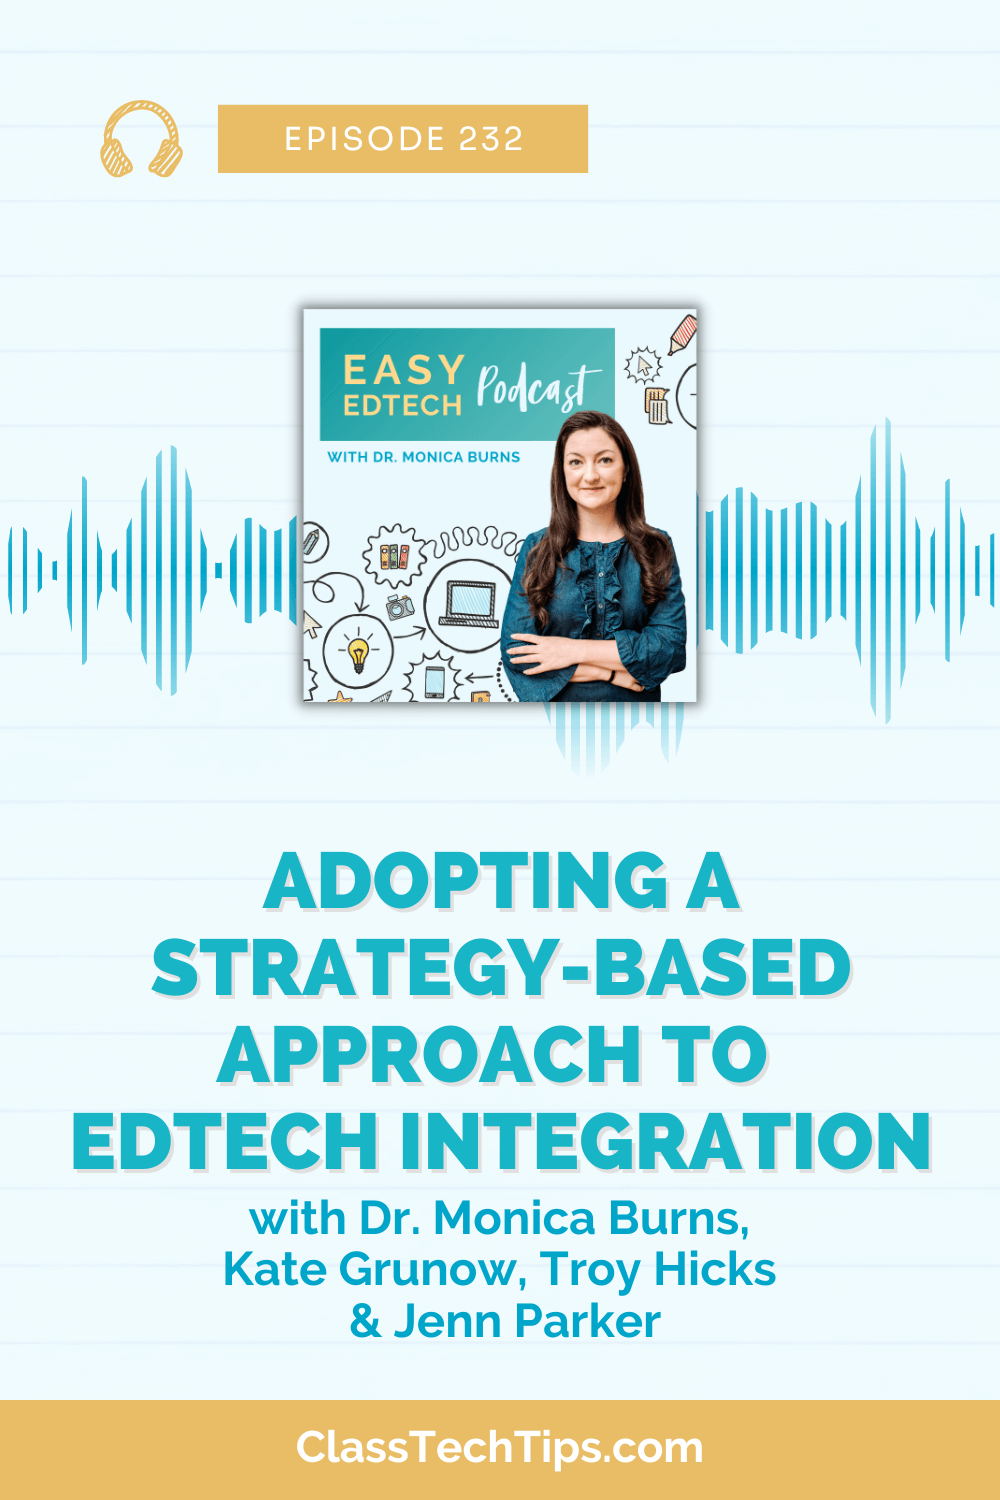 Podcast logo with the text "EdTech Integration" spotlighting the discussion on purposeful technology in education with experts Jenn Parker, Kate Grunow, and Troy Hicks.